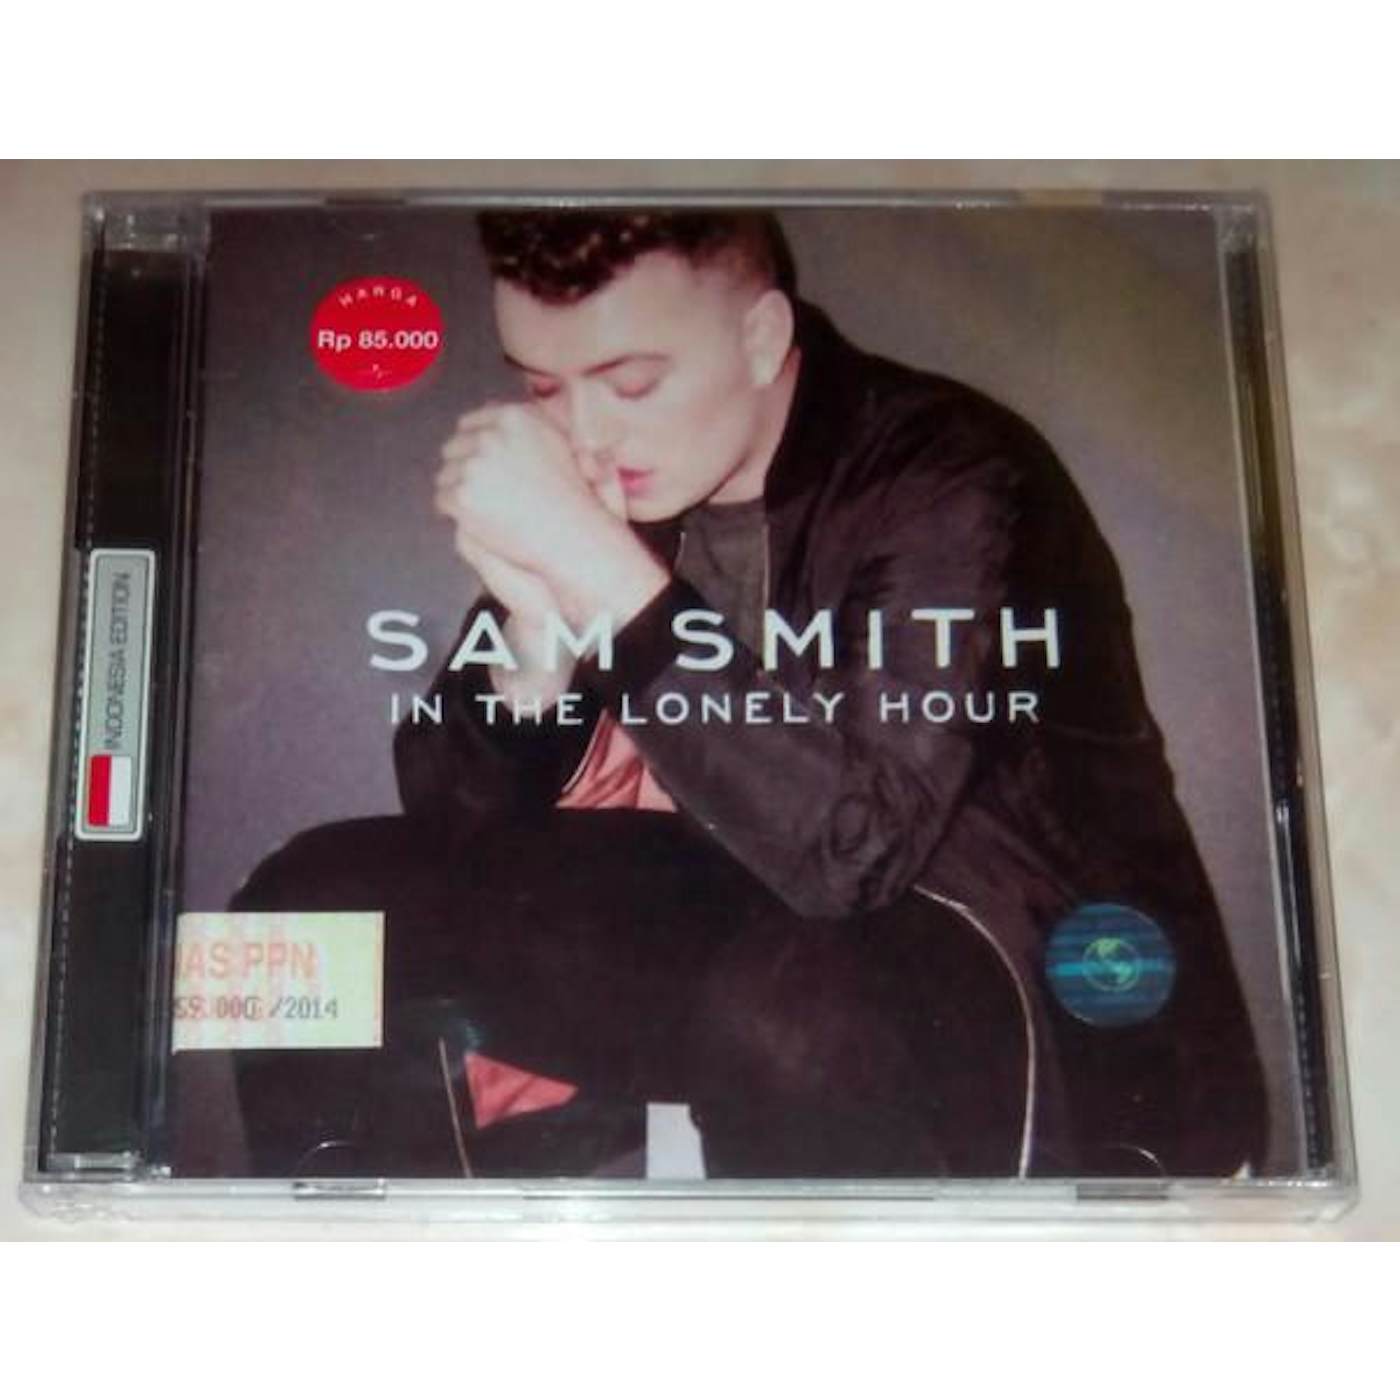 Sam Smith IN THE LONELY HOUR CD